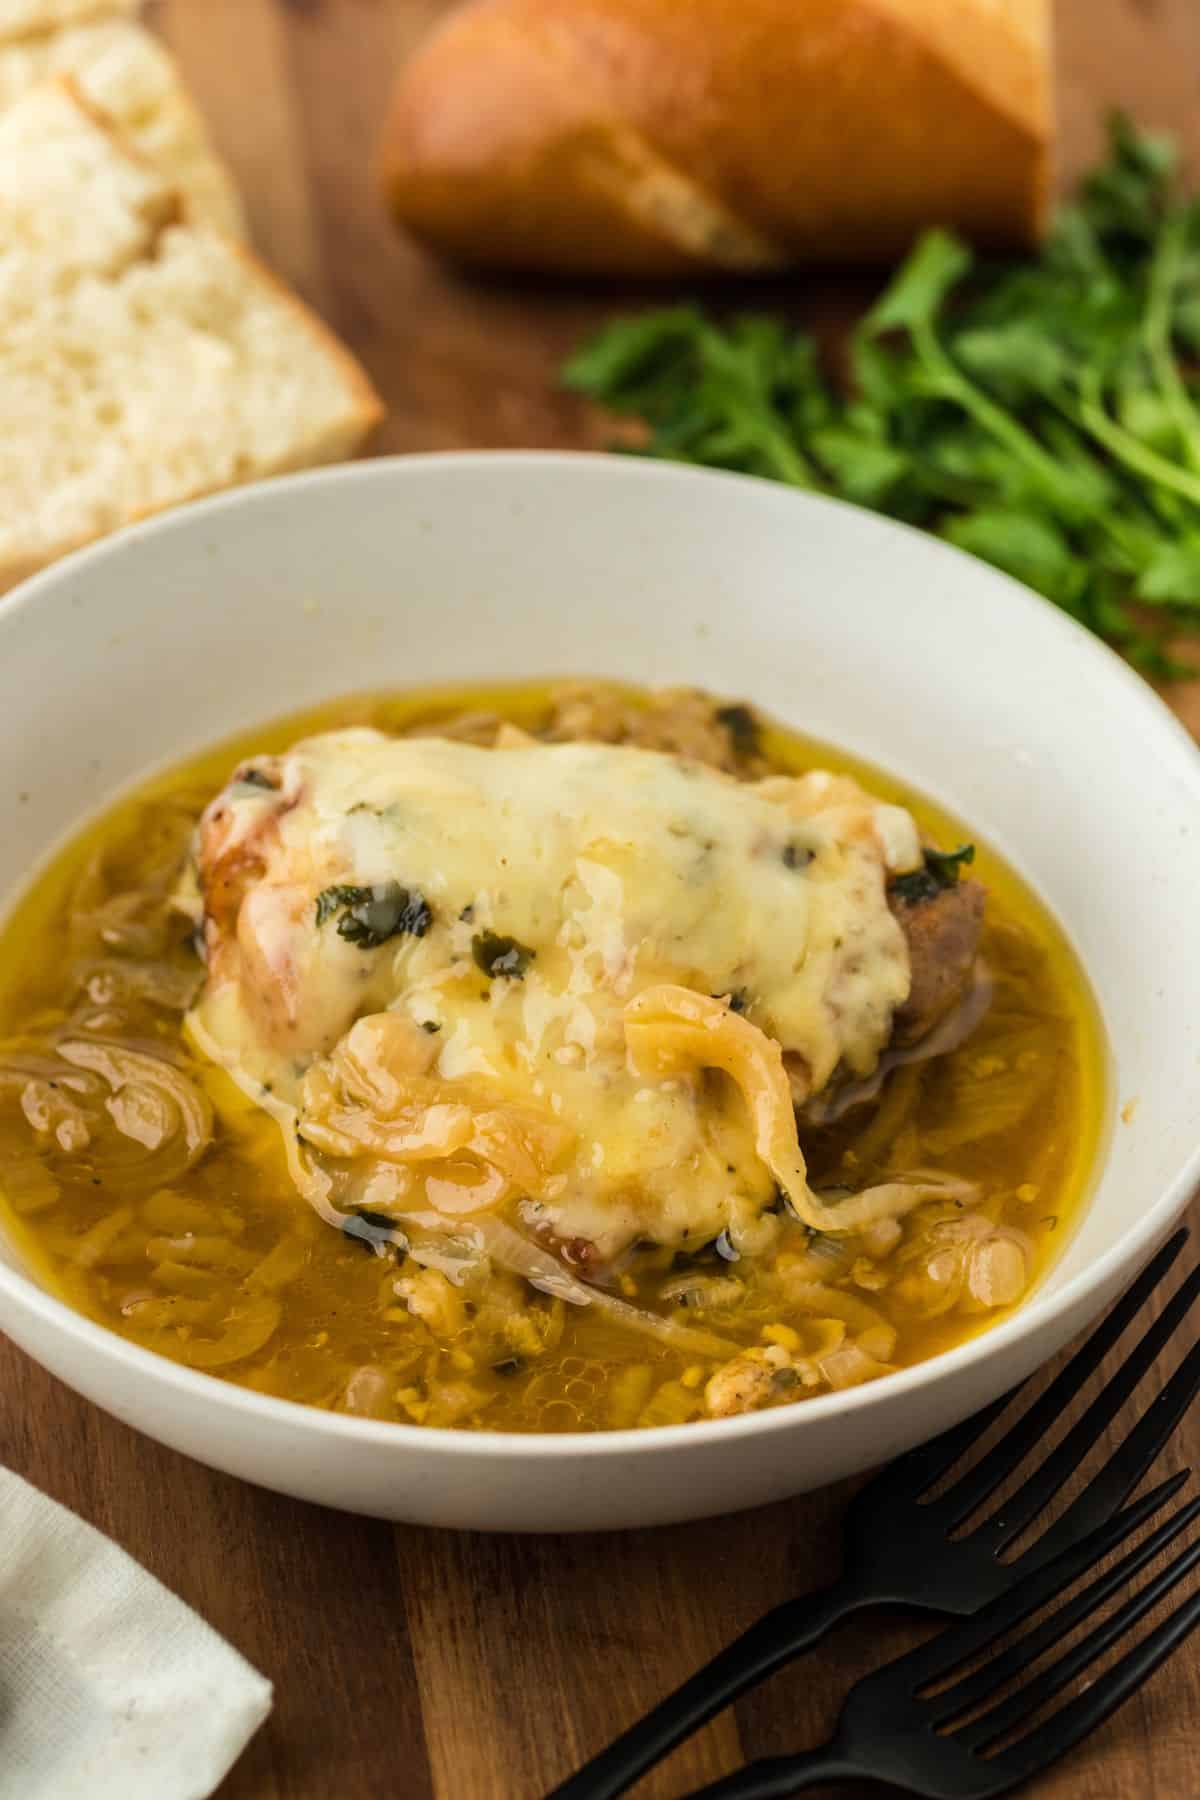 French onion chicken in a white bowl, topped with melted cheese and a generous amount of caramelized onion broth. In the background, there's a baguette, fresh parsley, and two black forks